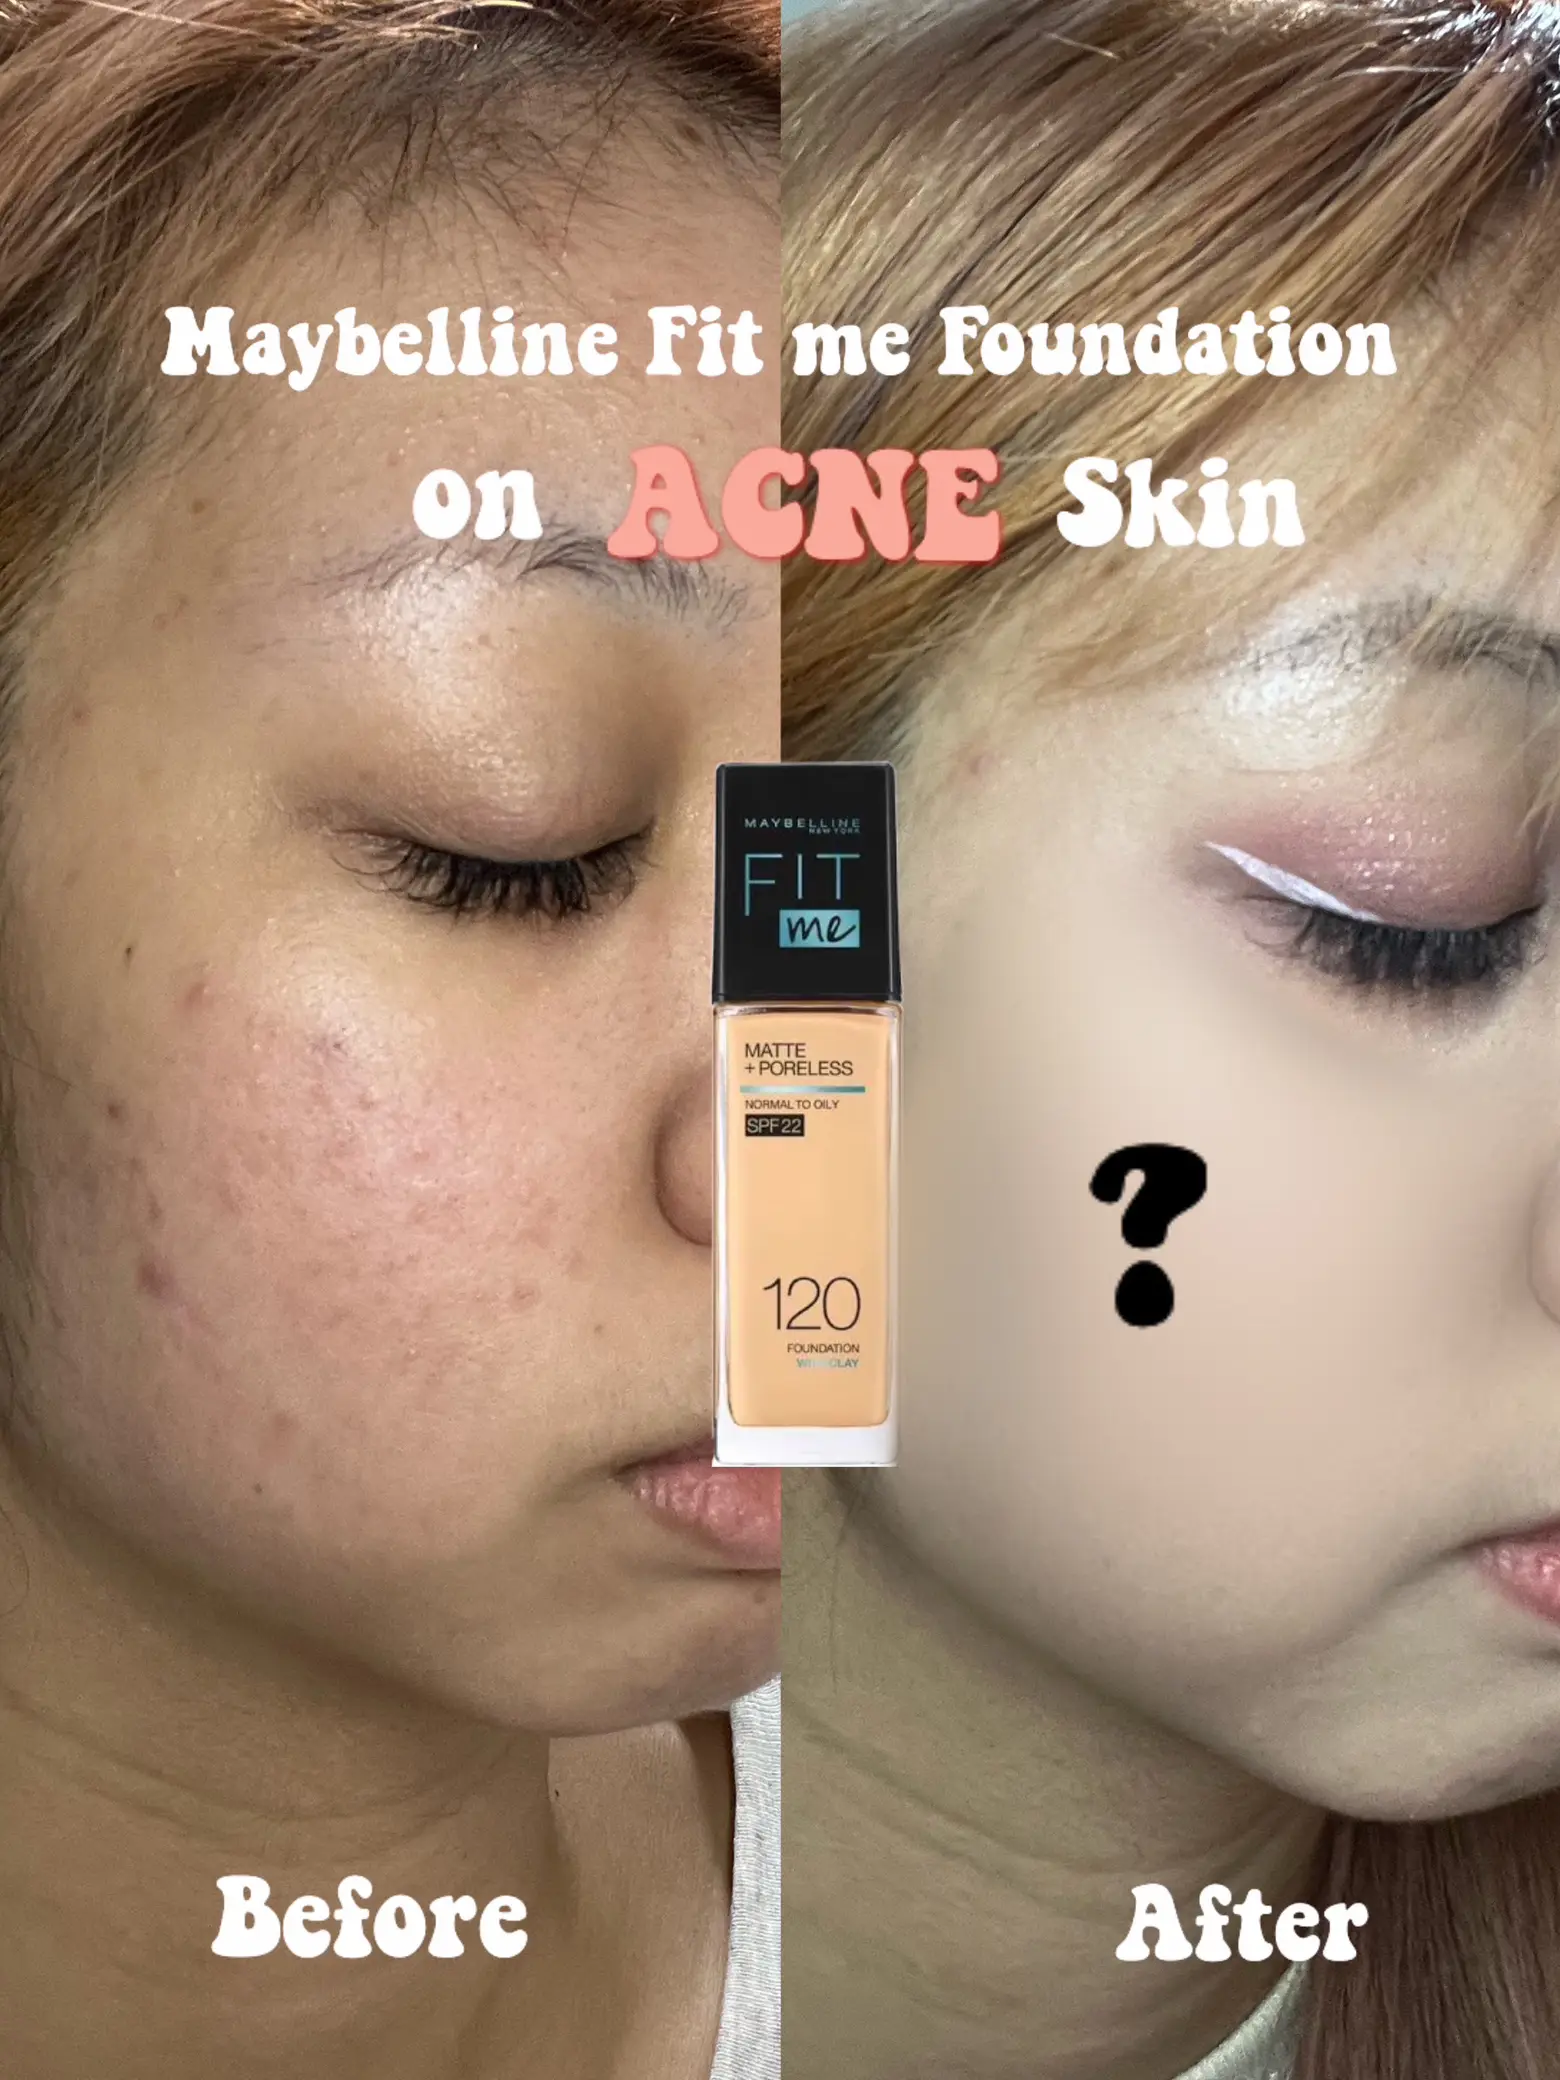 Trying Maybelline Fit me Foundation on acne skin🫣 | Gallery posted by pheezebol🍓 Lemon8